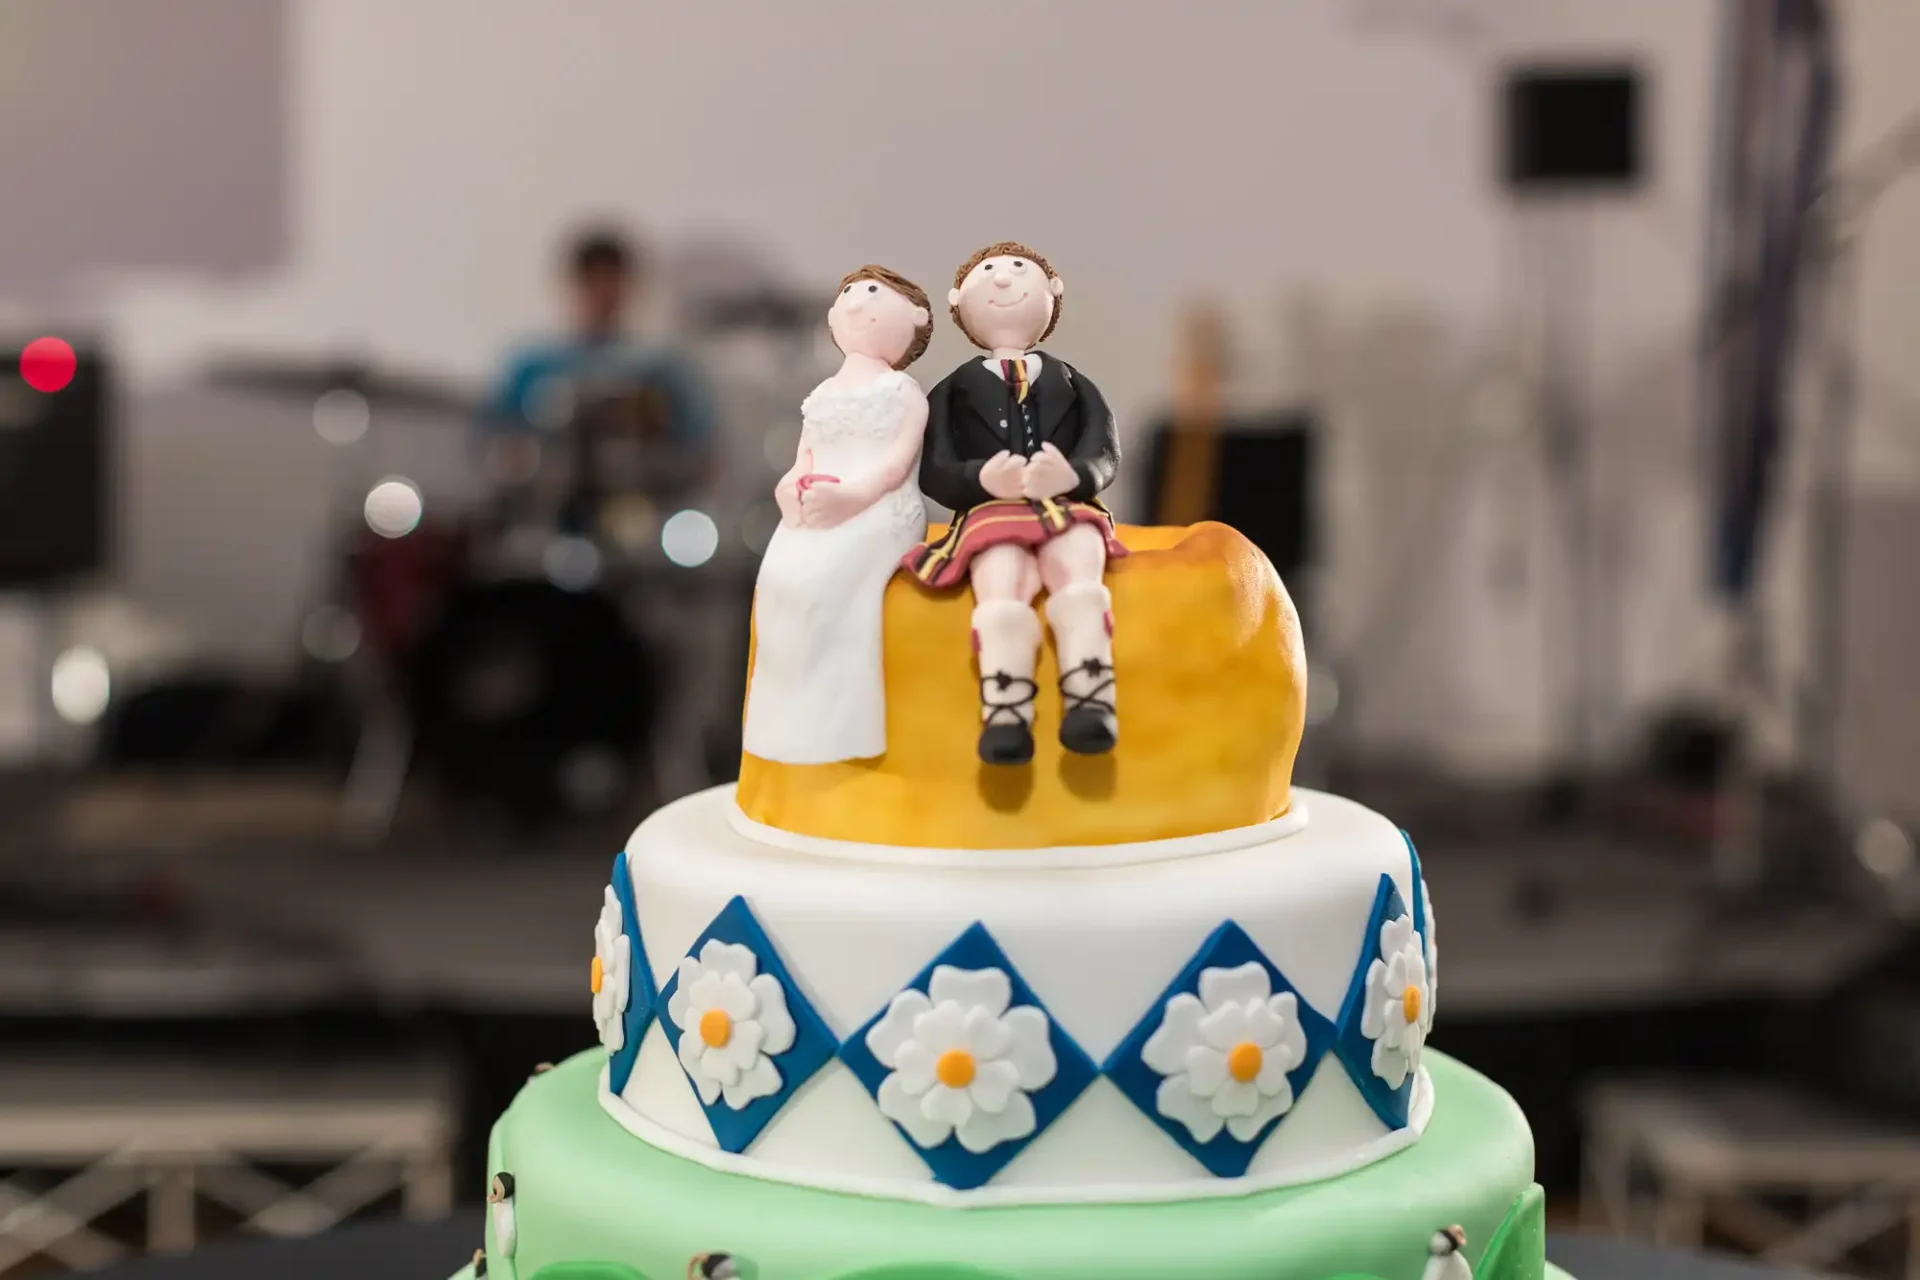 Wedding cake topped with a figurine of a bride and groom sitting on a bench, with a colorful floral design on the tiers, set against a blurred background of a party.